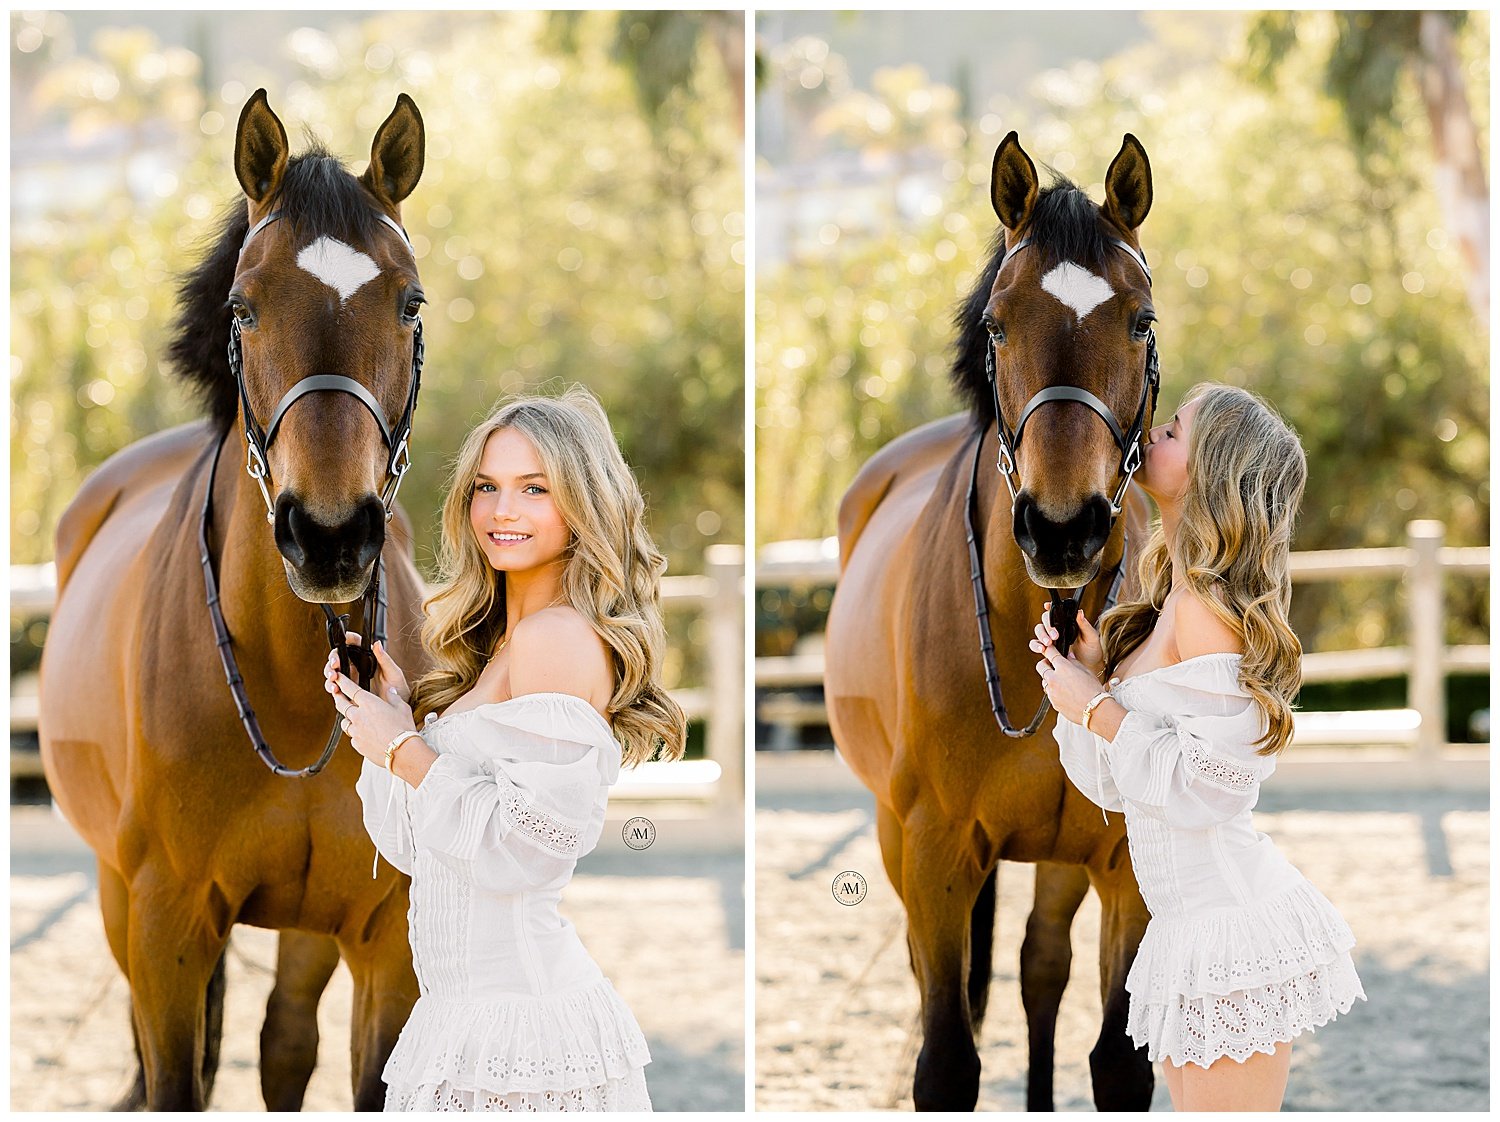 Camryn and horses